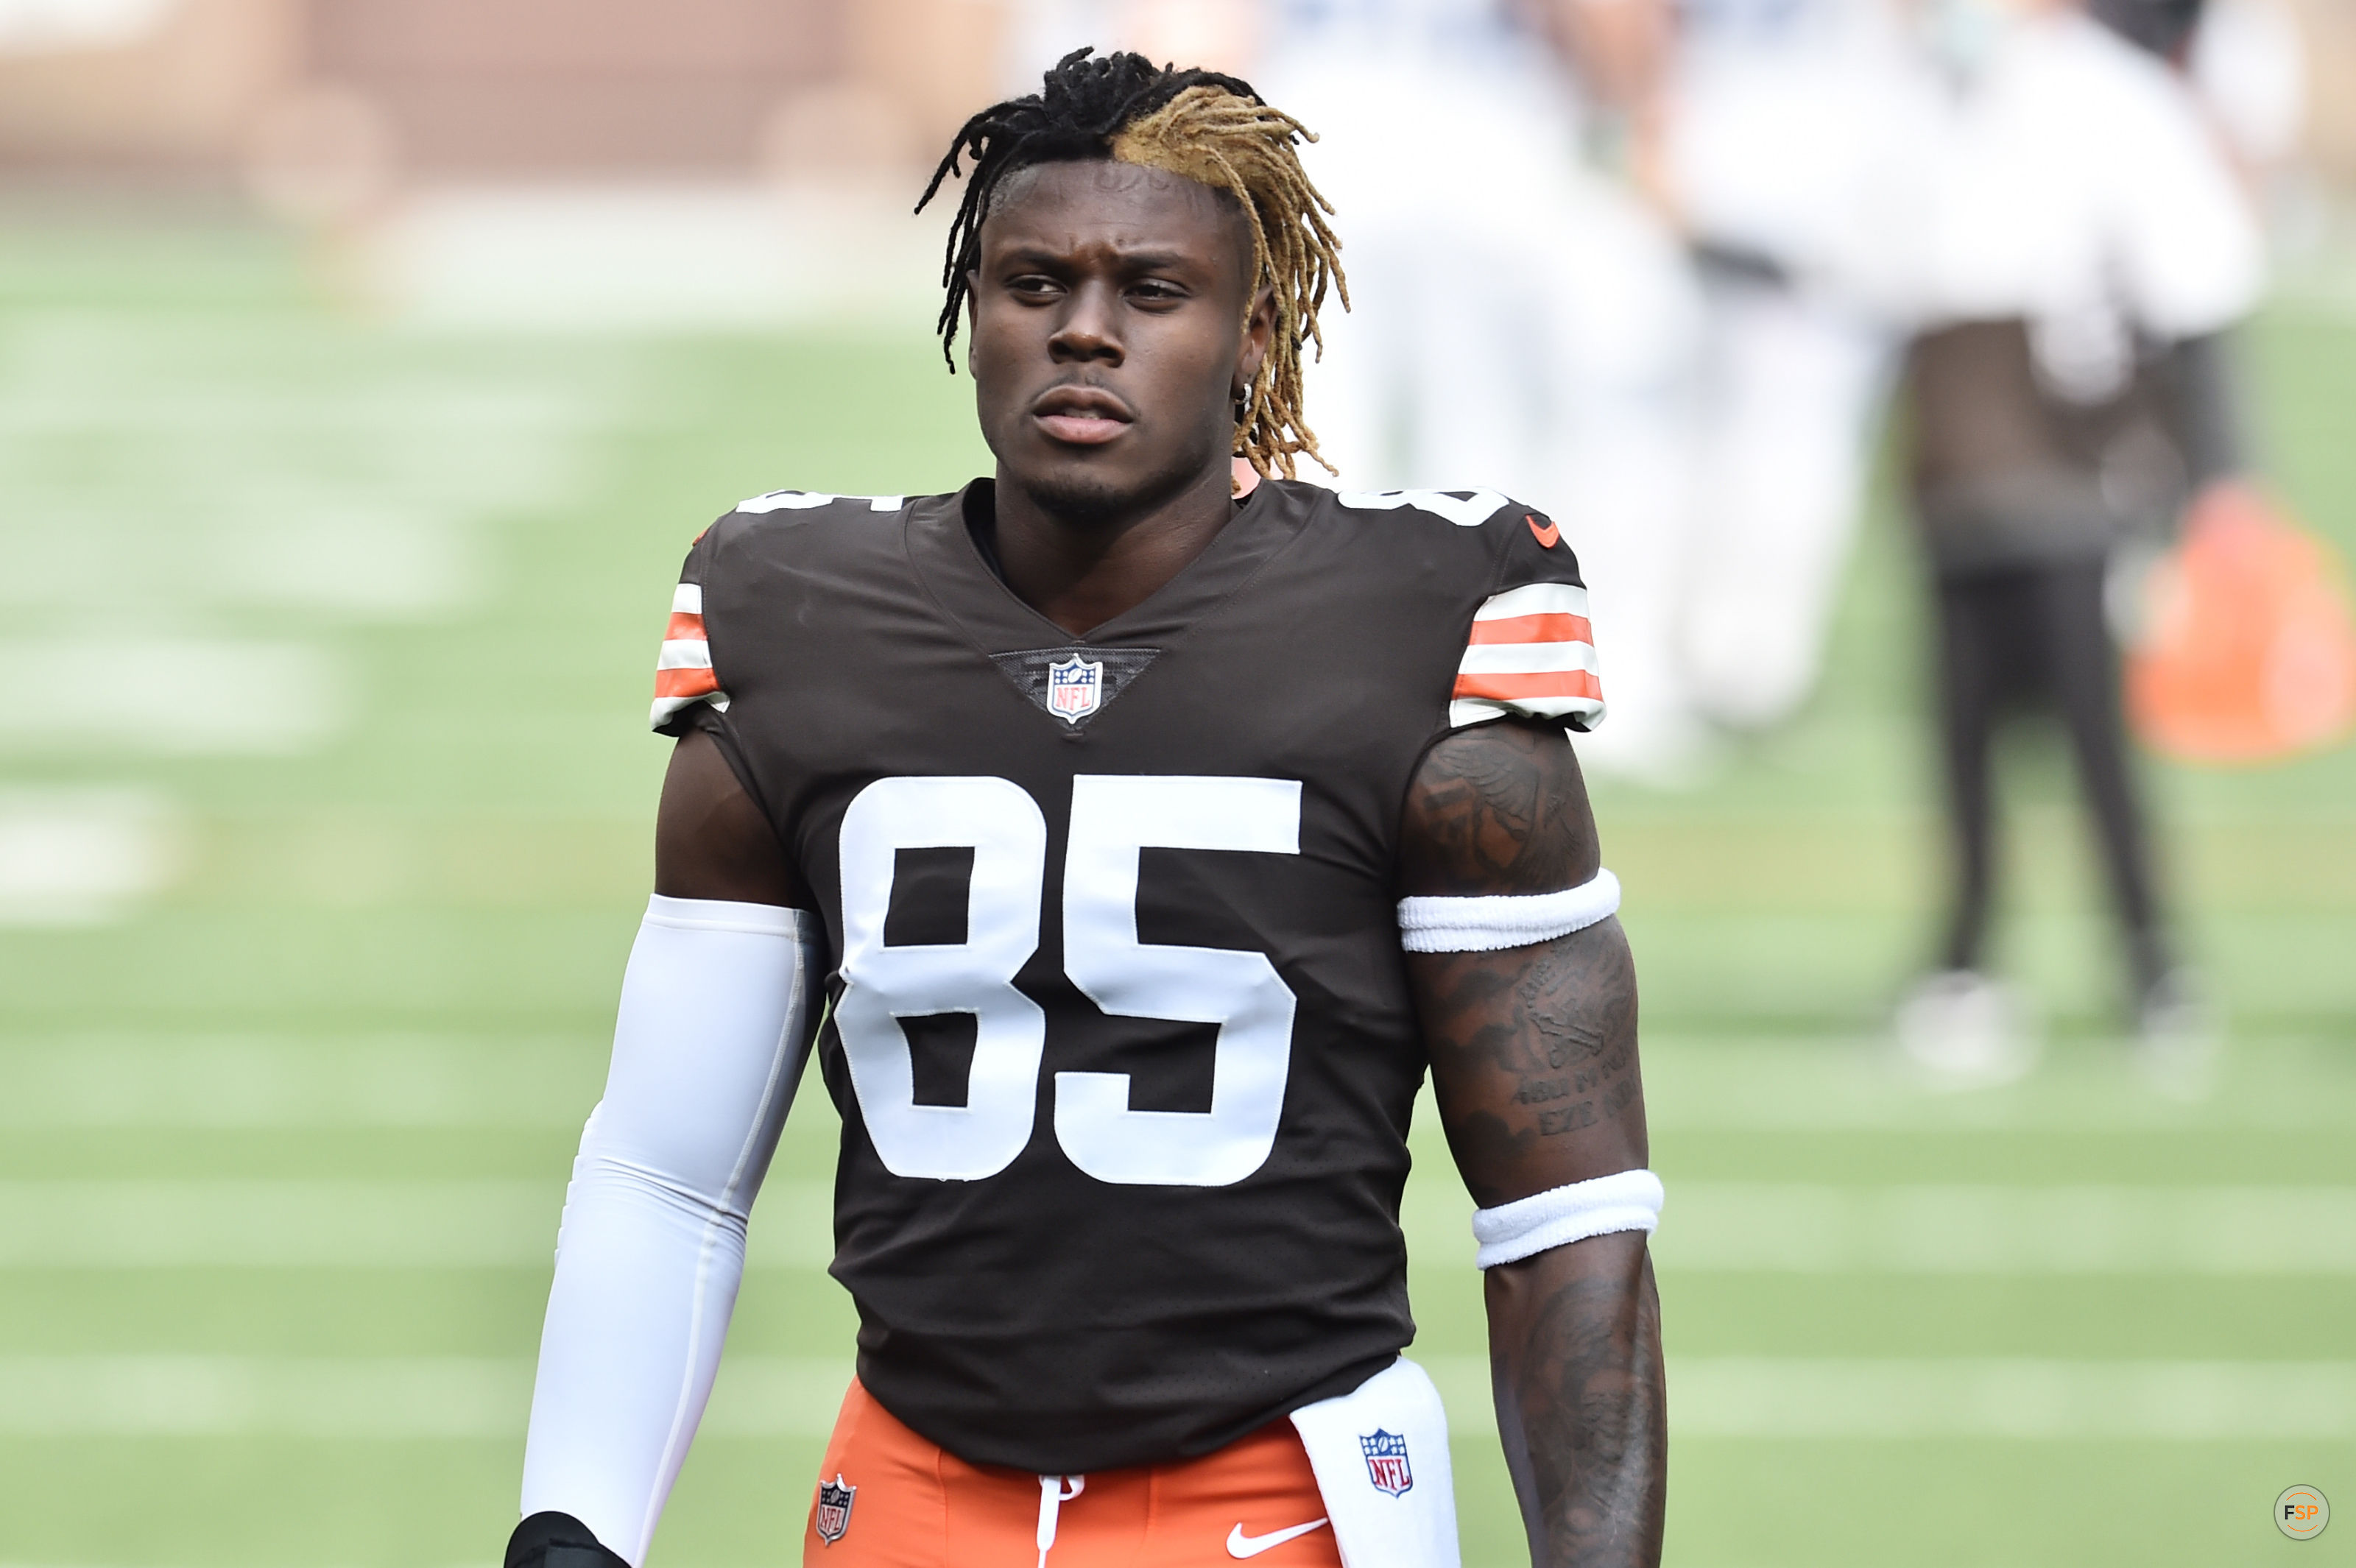 Oct 11, 2020; Cleveland, Ohio, USA; Cleveland Browns tight end David Njoku (85) warms up before the game between the Cleveland Browns and the Indianapolis Colts at FirstEnergy Stadium. Mandatory Credit: Ken Blaze-USA TODAY Sports